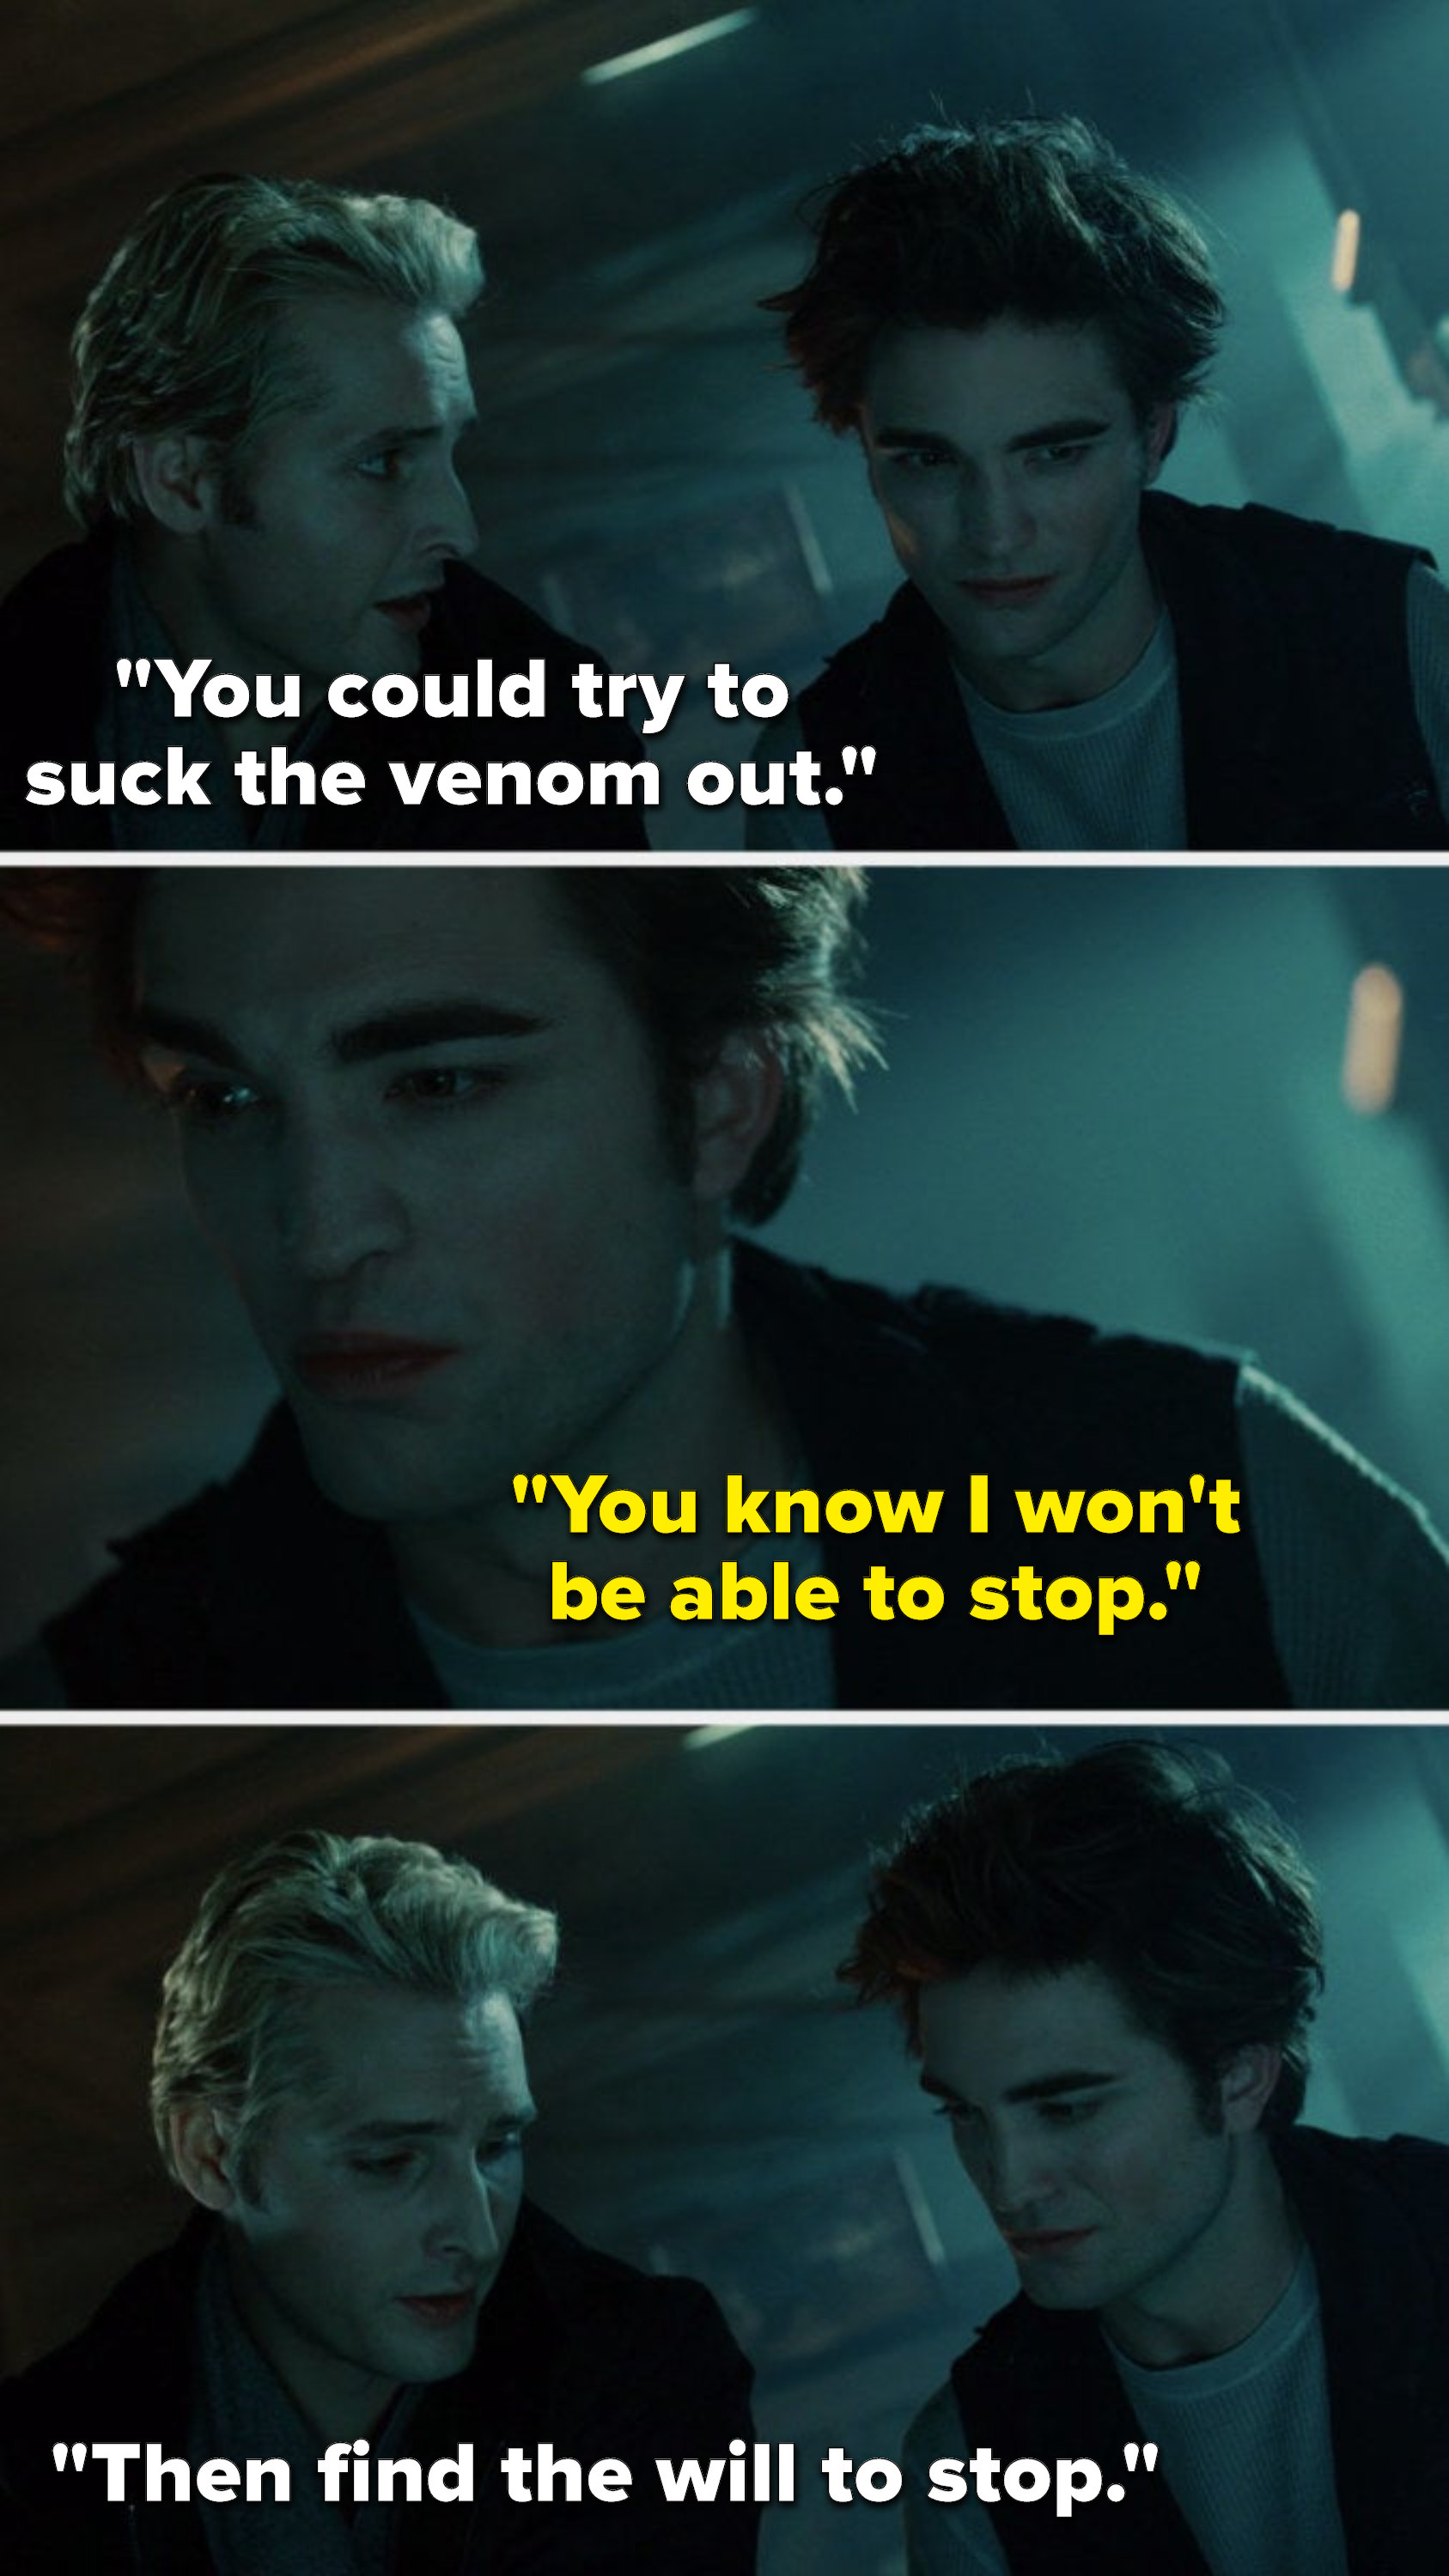 Carlisle says, &quot;You could try to suck the venom out,&quot; Edward says, &quot;You know I won&#x27;t be able to stop,&quot; and Carlisle says, &quot;Then find the will to stop&quot;